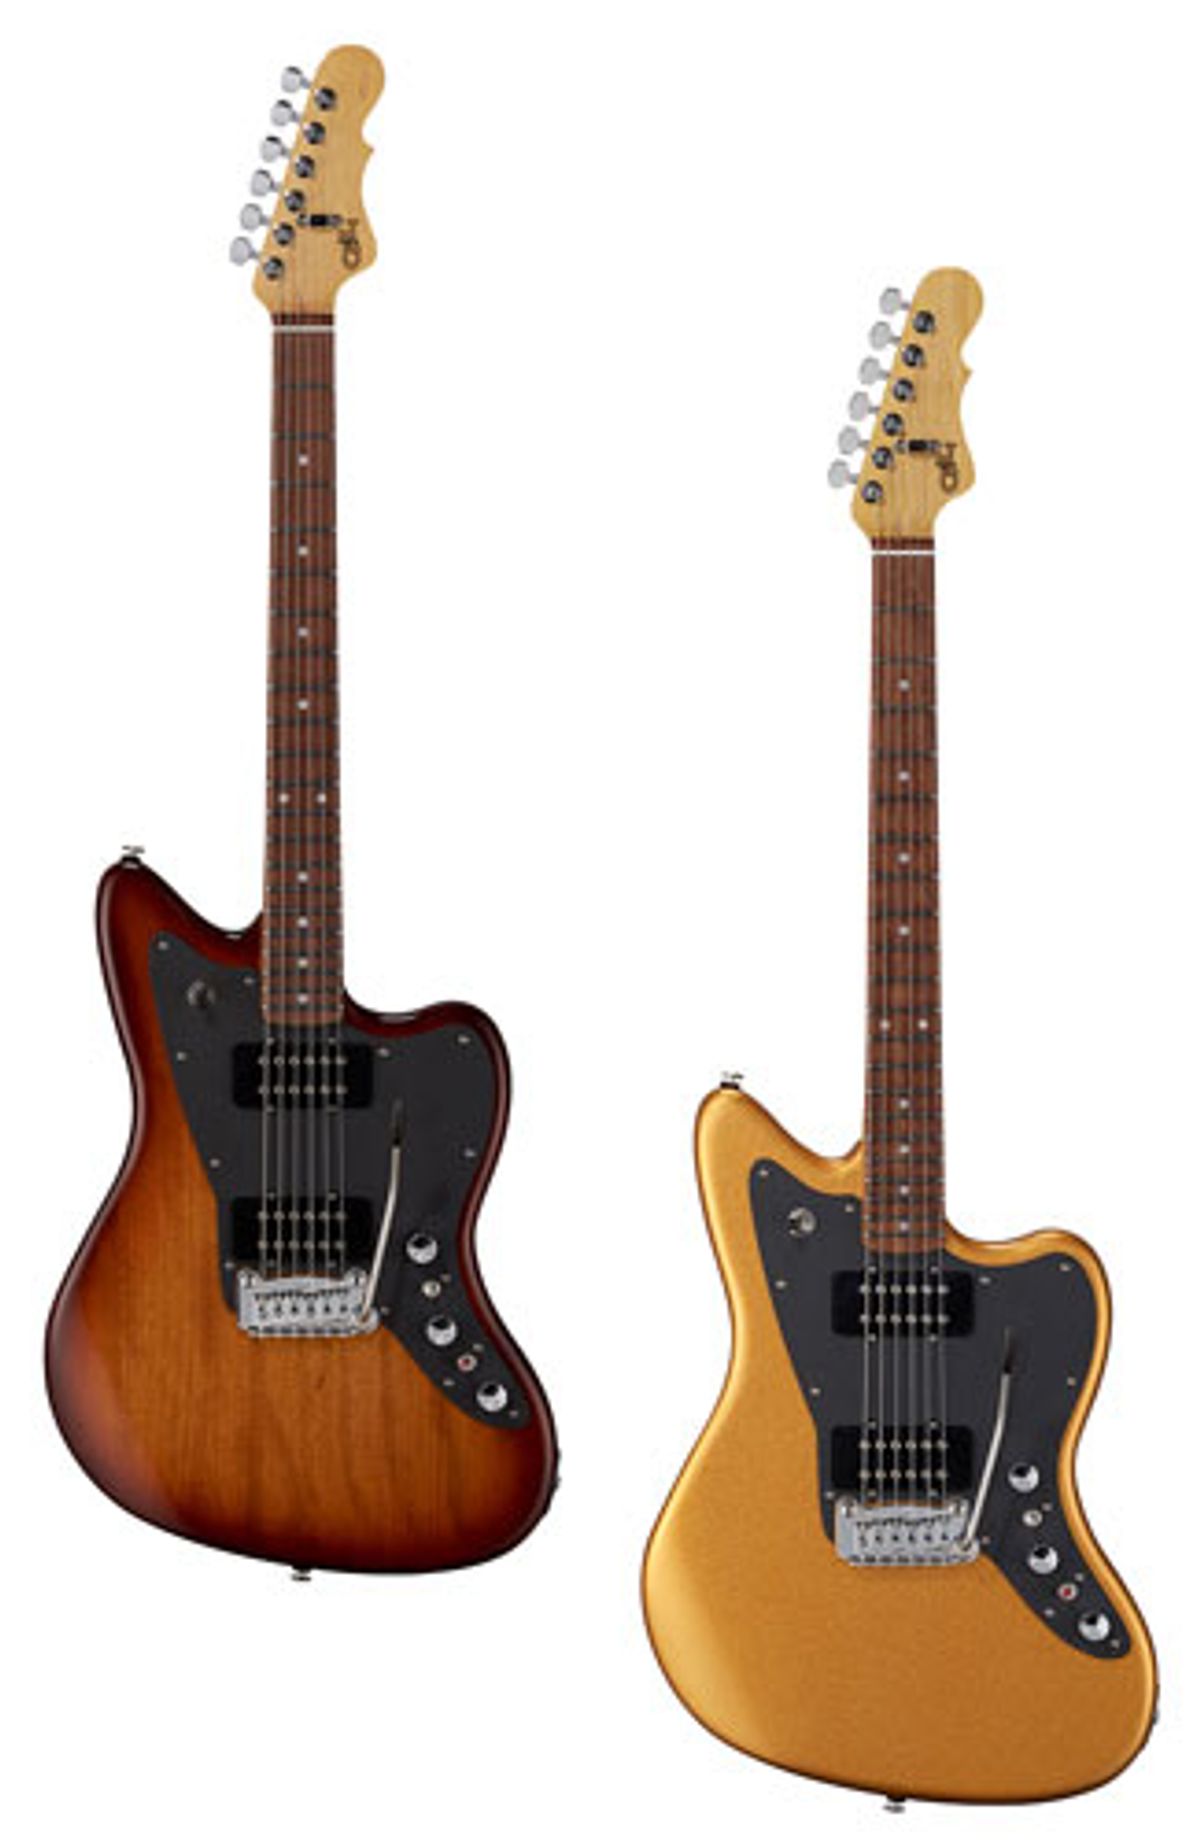 G&L Introduces the Doheny V12